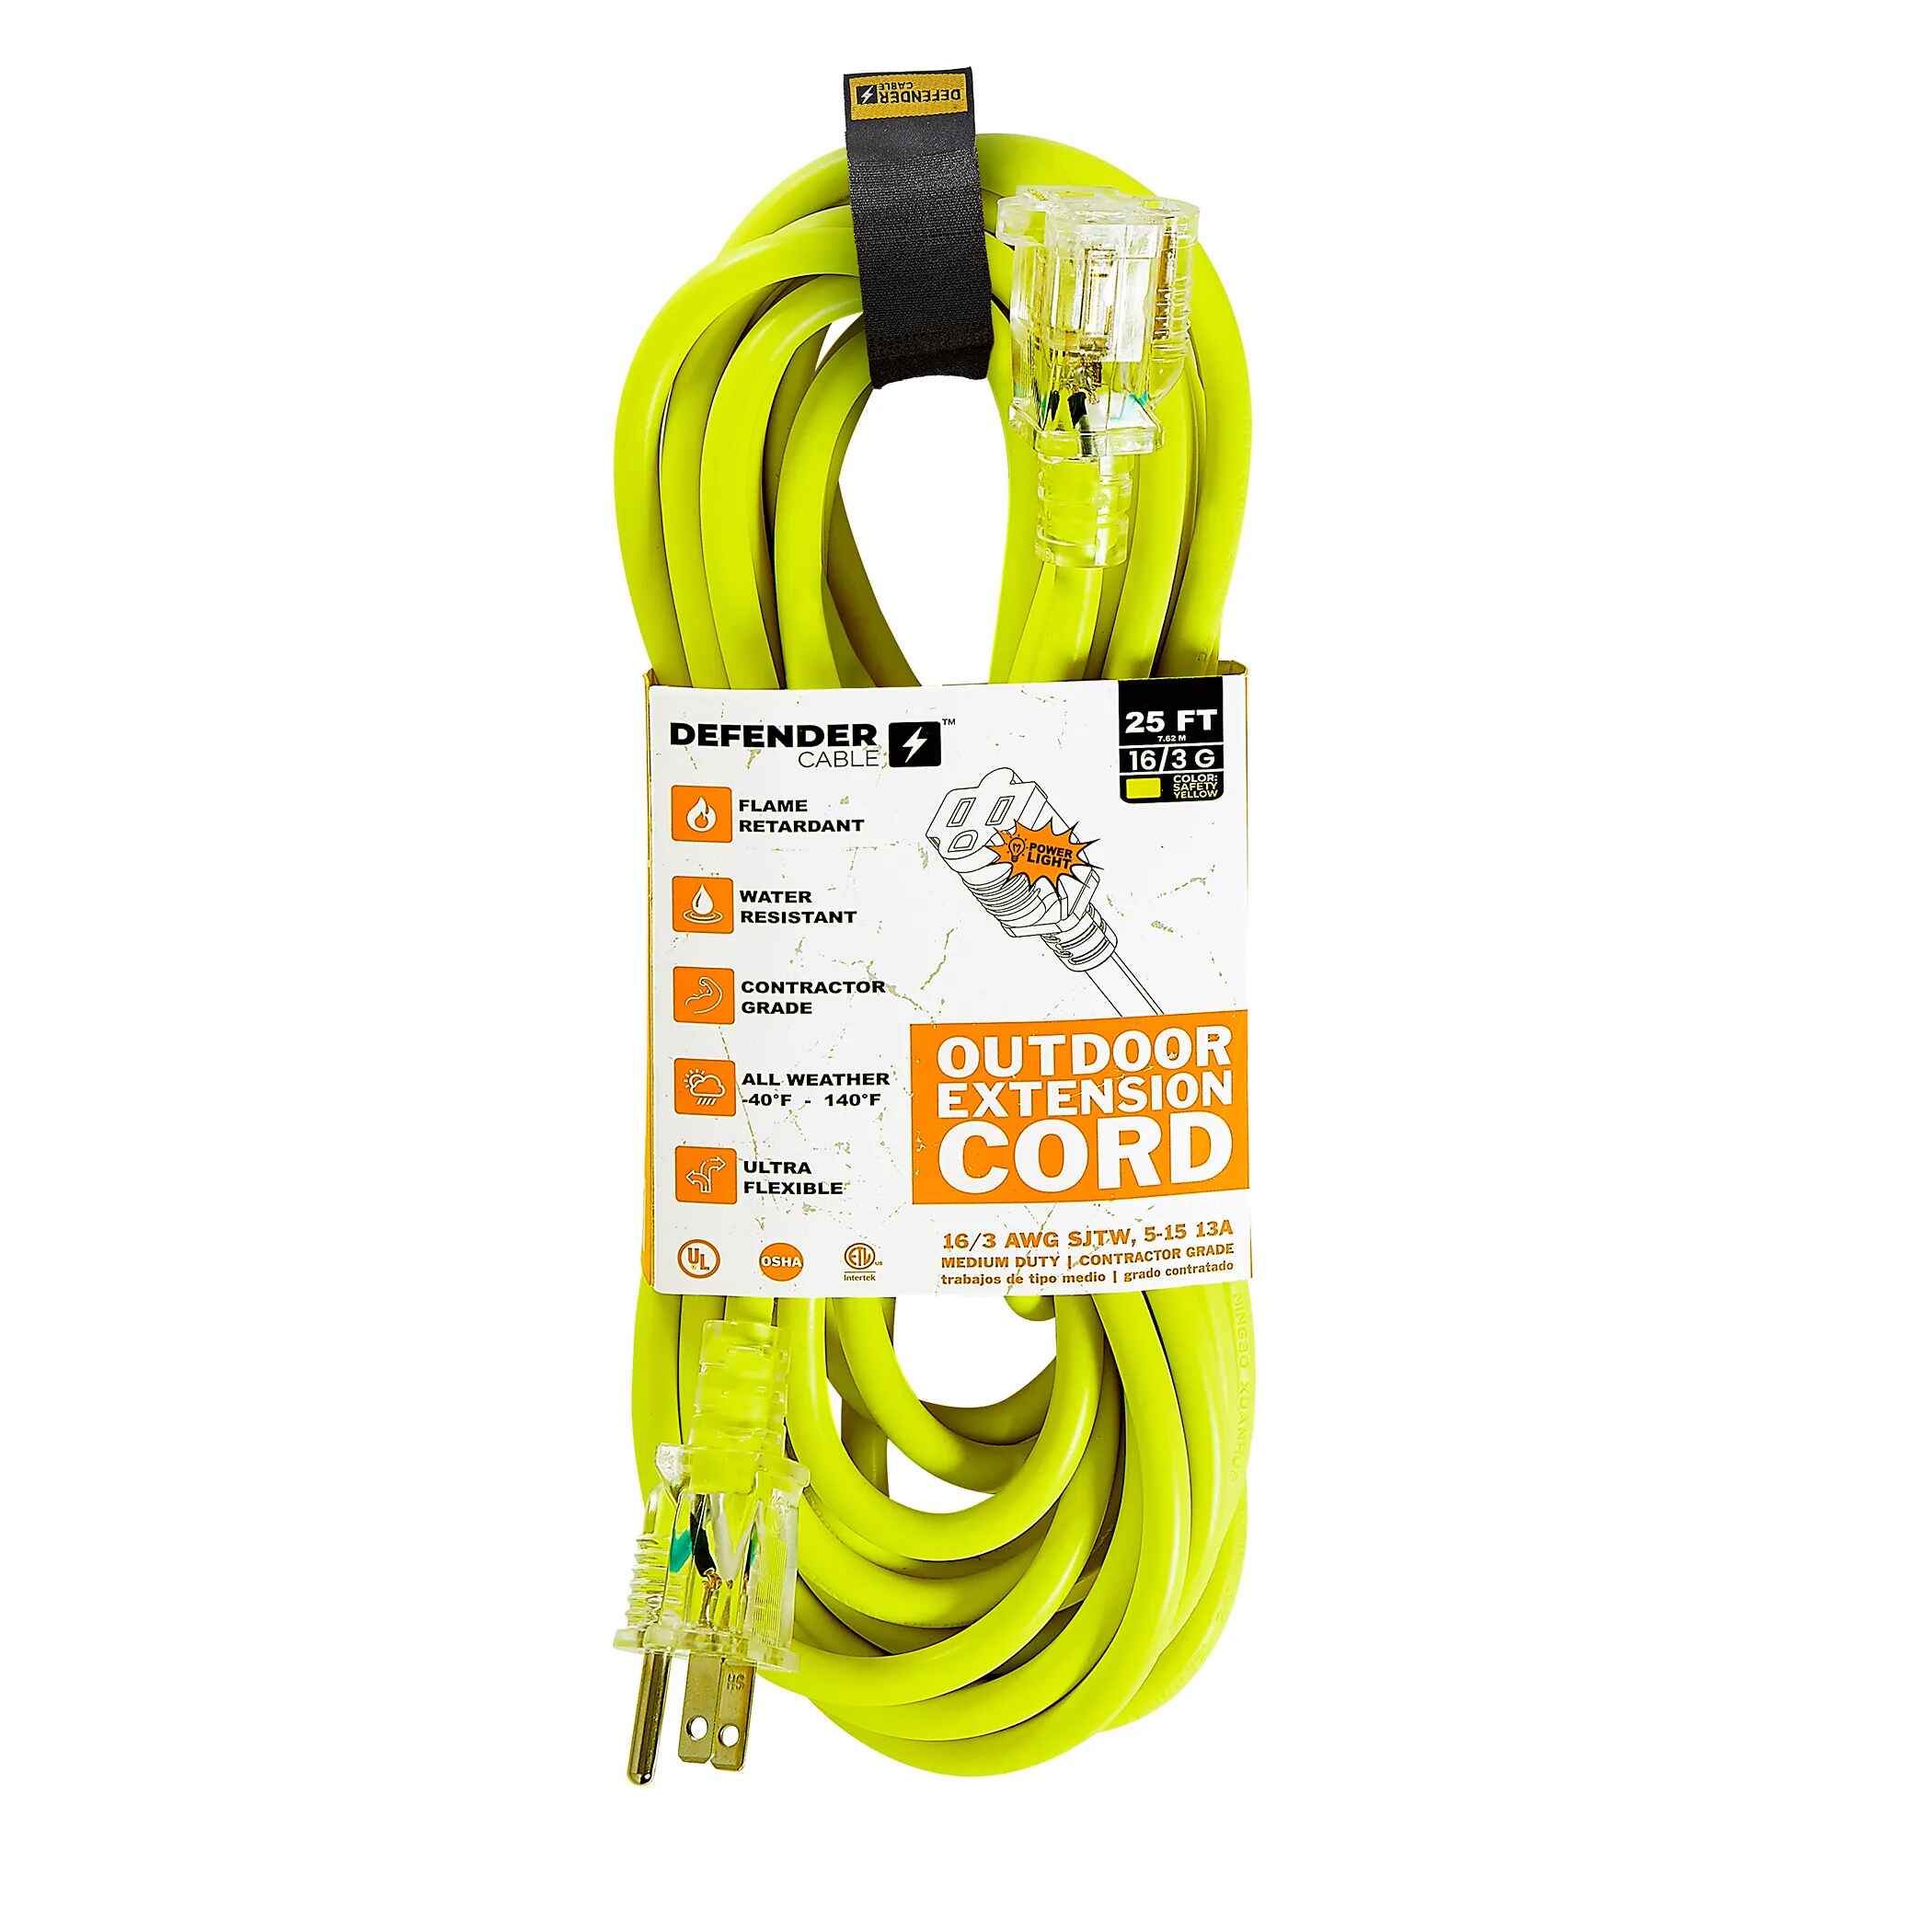 A Guide to Extension Cord Safety - FullScale Home Inspection